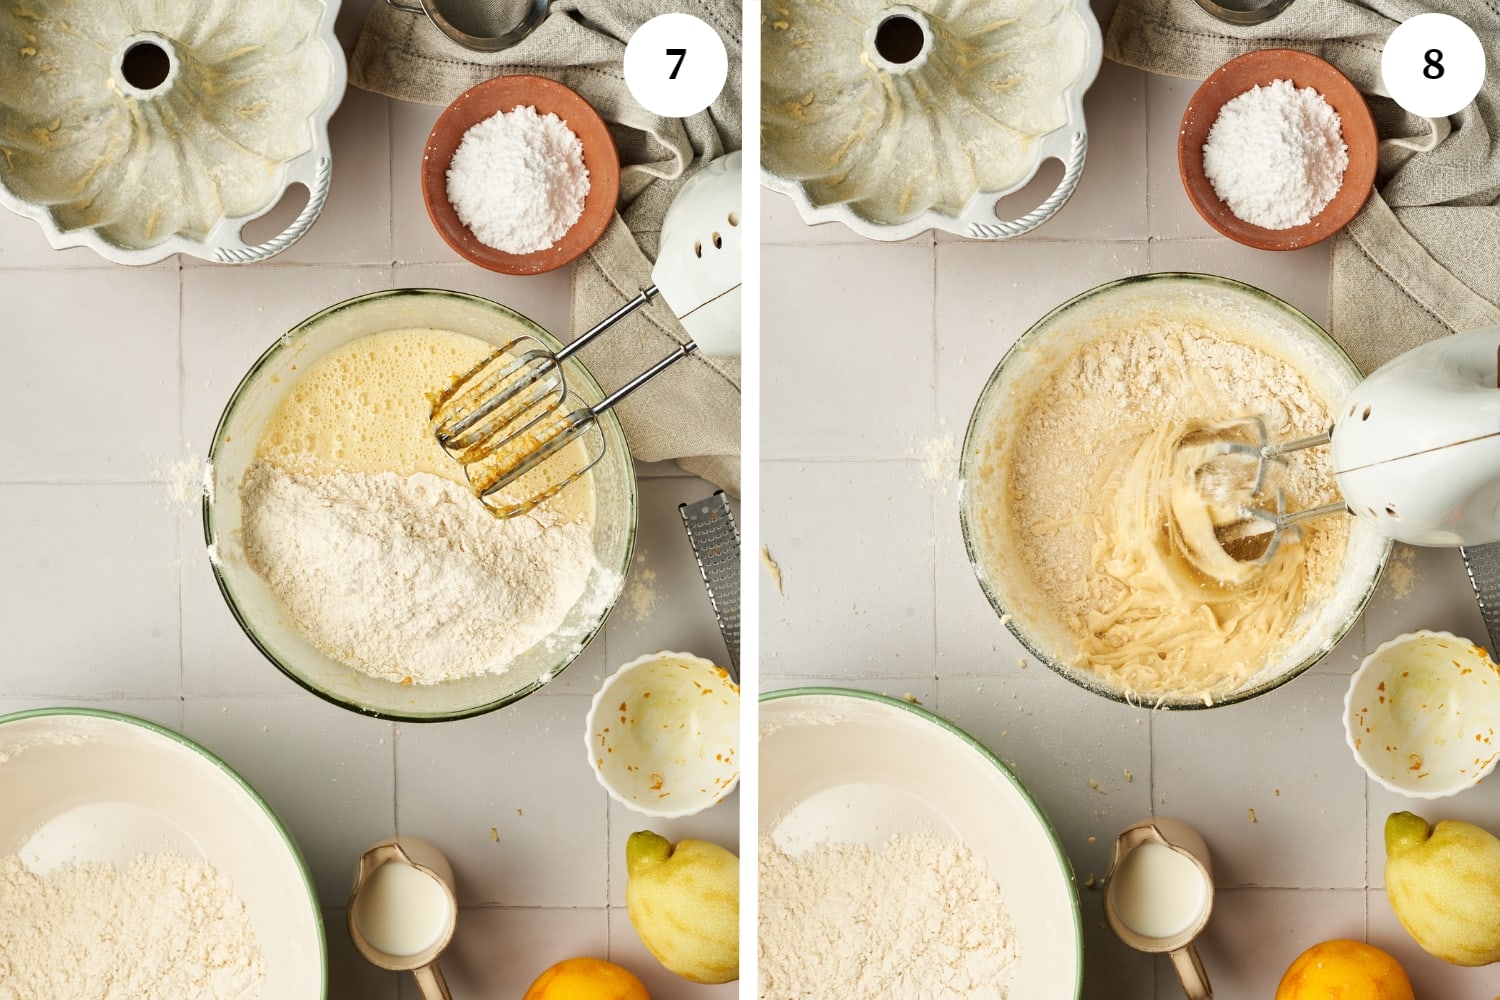 first photo is a bowl of batter with flour dumped at the top. next photo is beating the batter with an electric mixer.